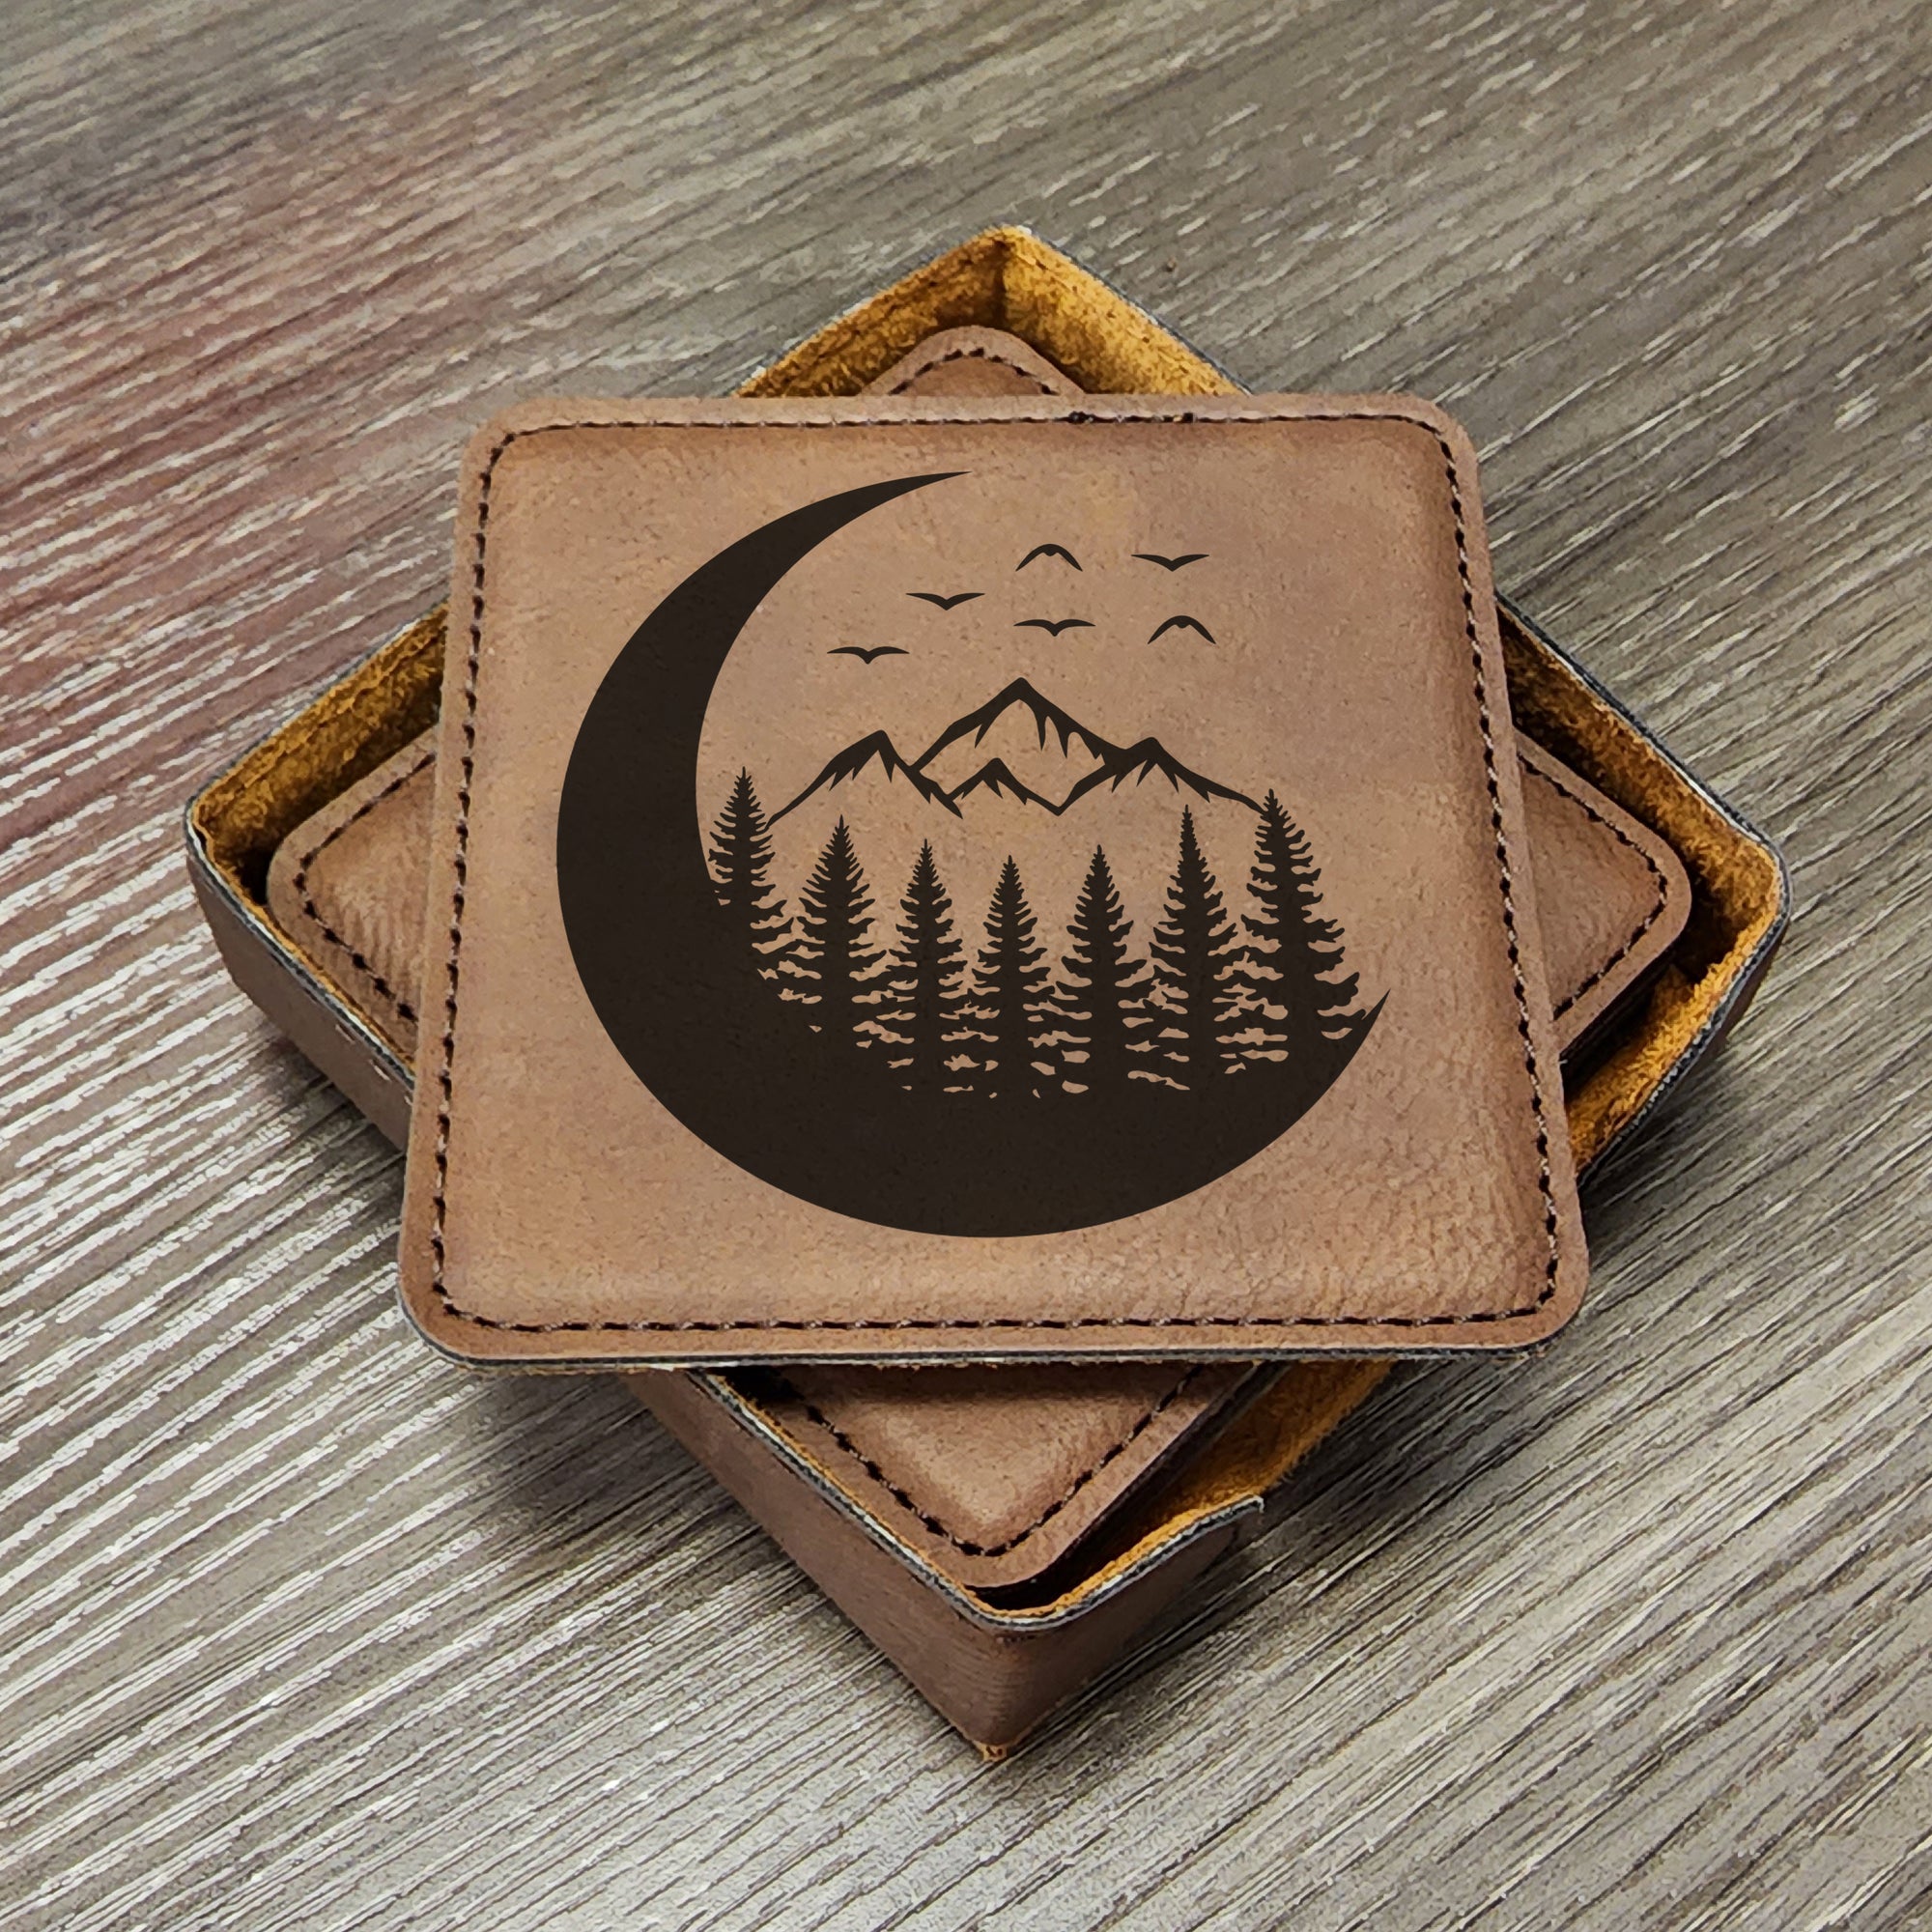 Mountain Ski Cabin Moon Forest Mountains Coasters, Great for Cabin Vacation Homes in the Mountains, Set of 6 With Holder